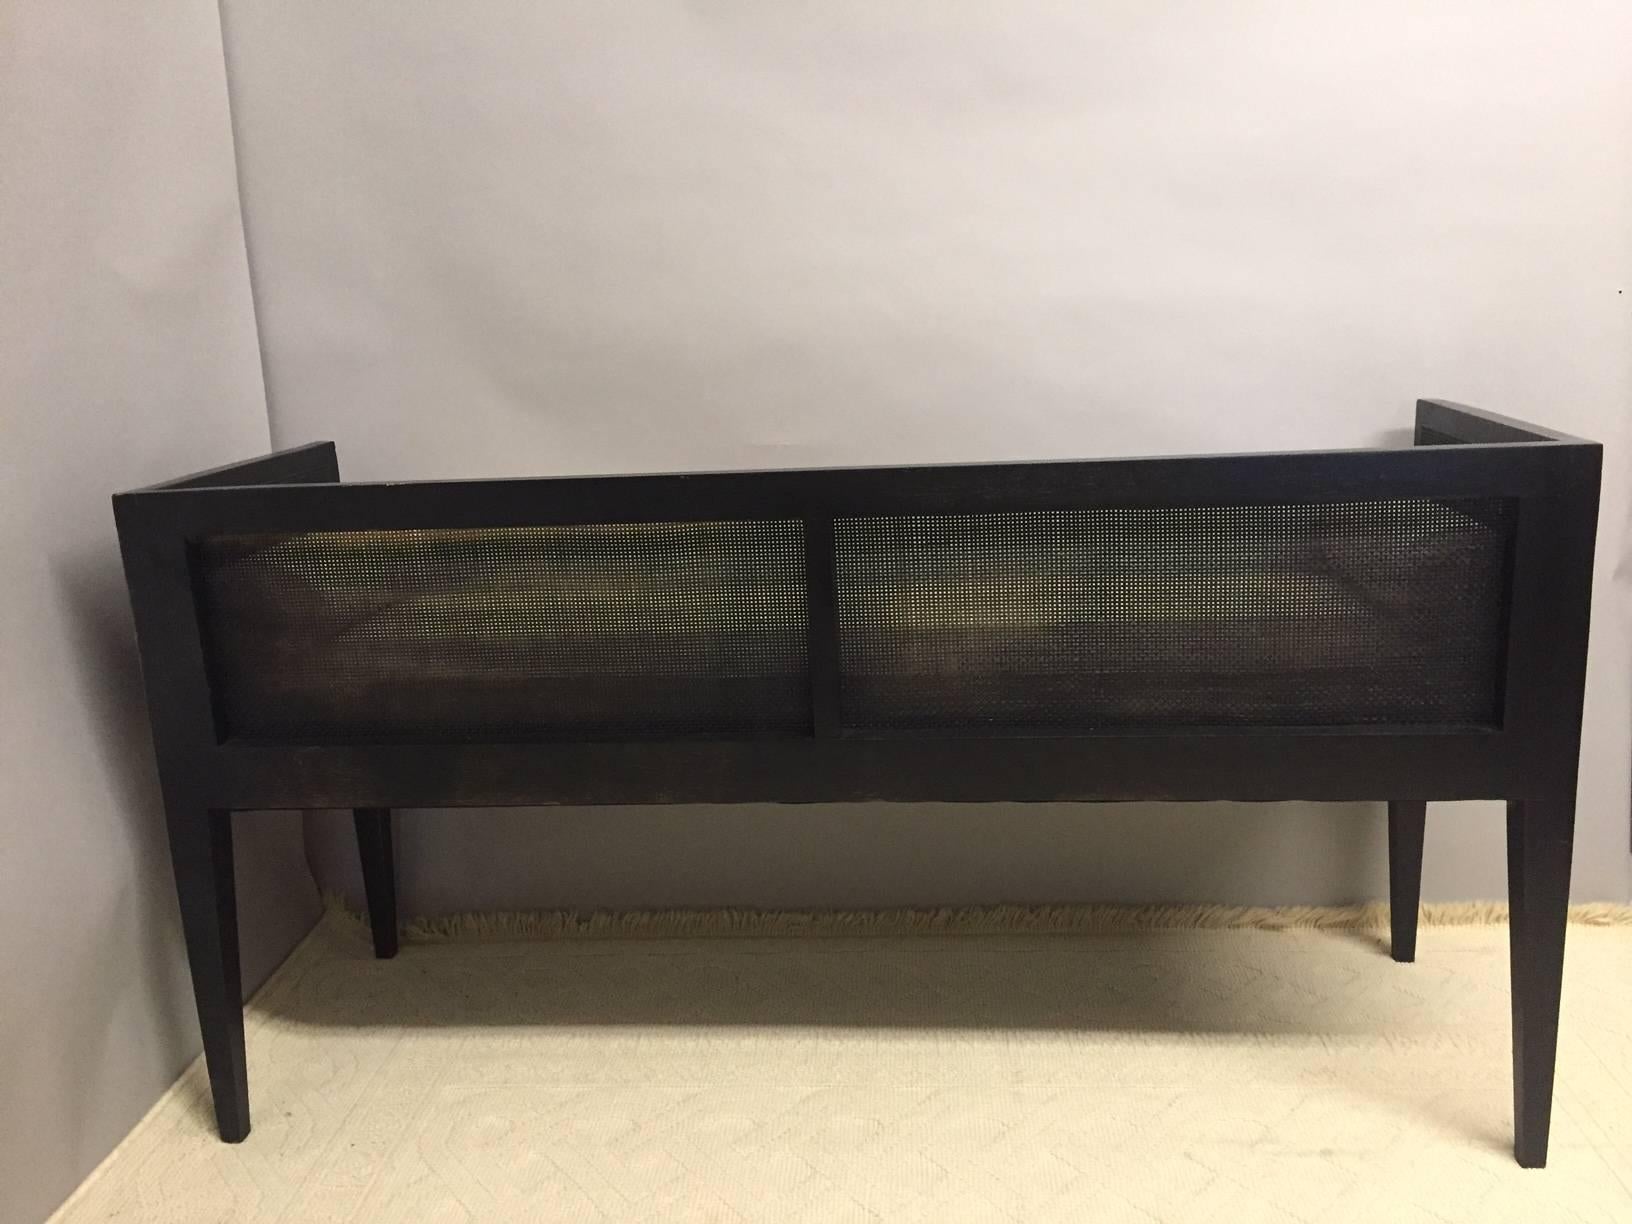 Traditional and handsome black wood and caned bench with handsome clean angular lines and newly upholstered in natural colored linen.